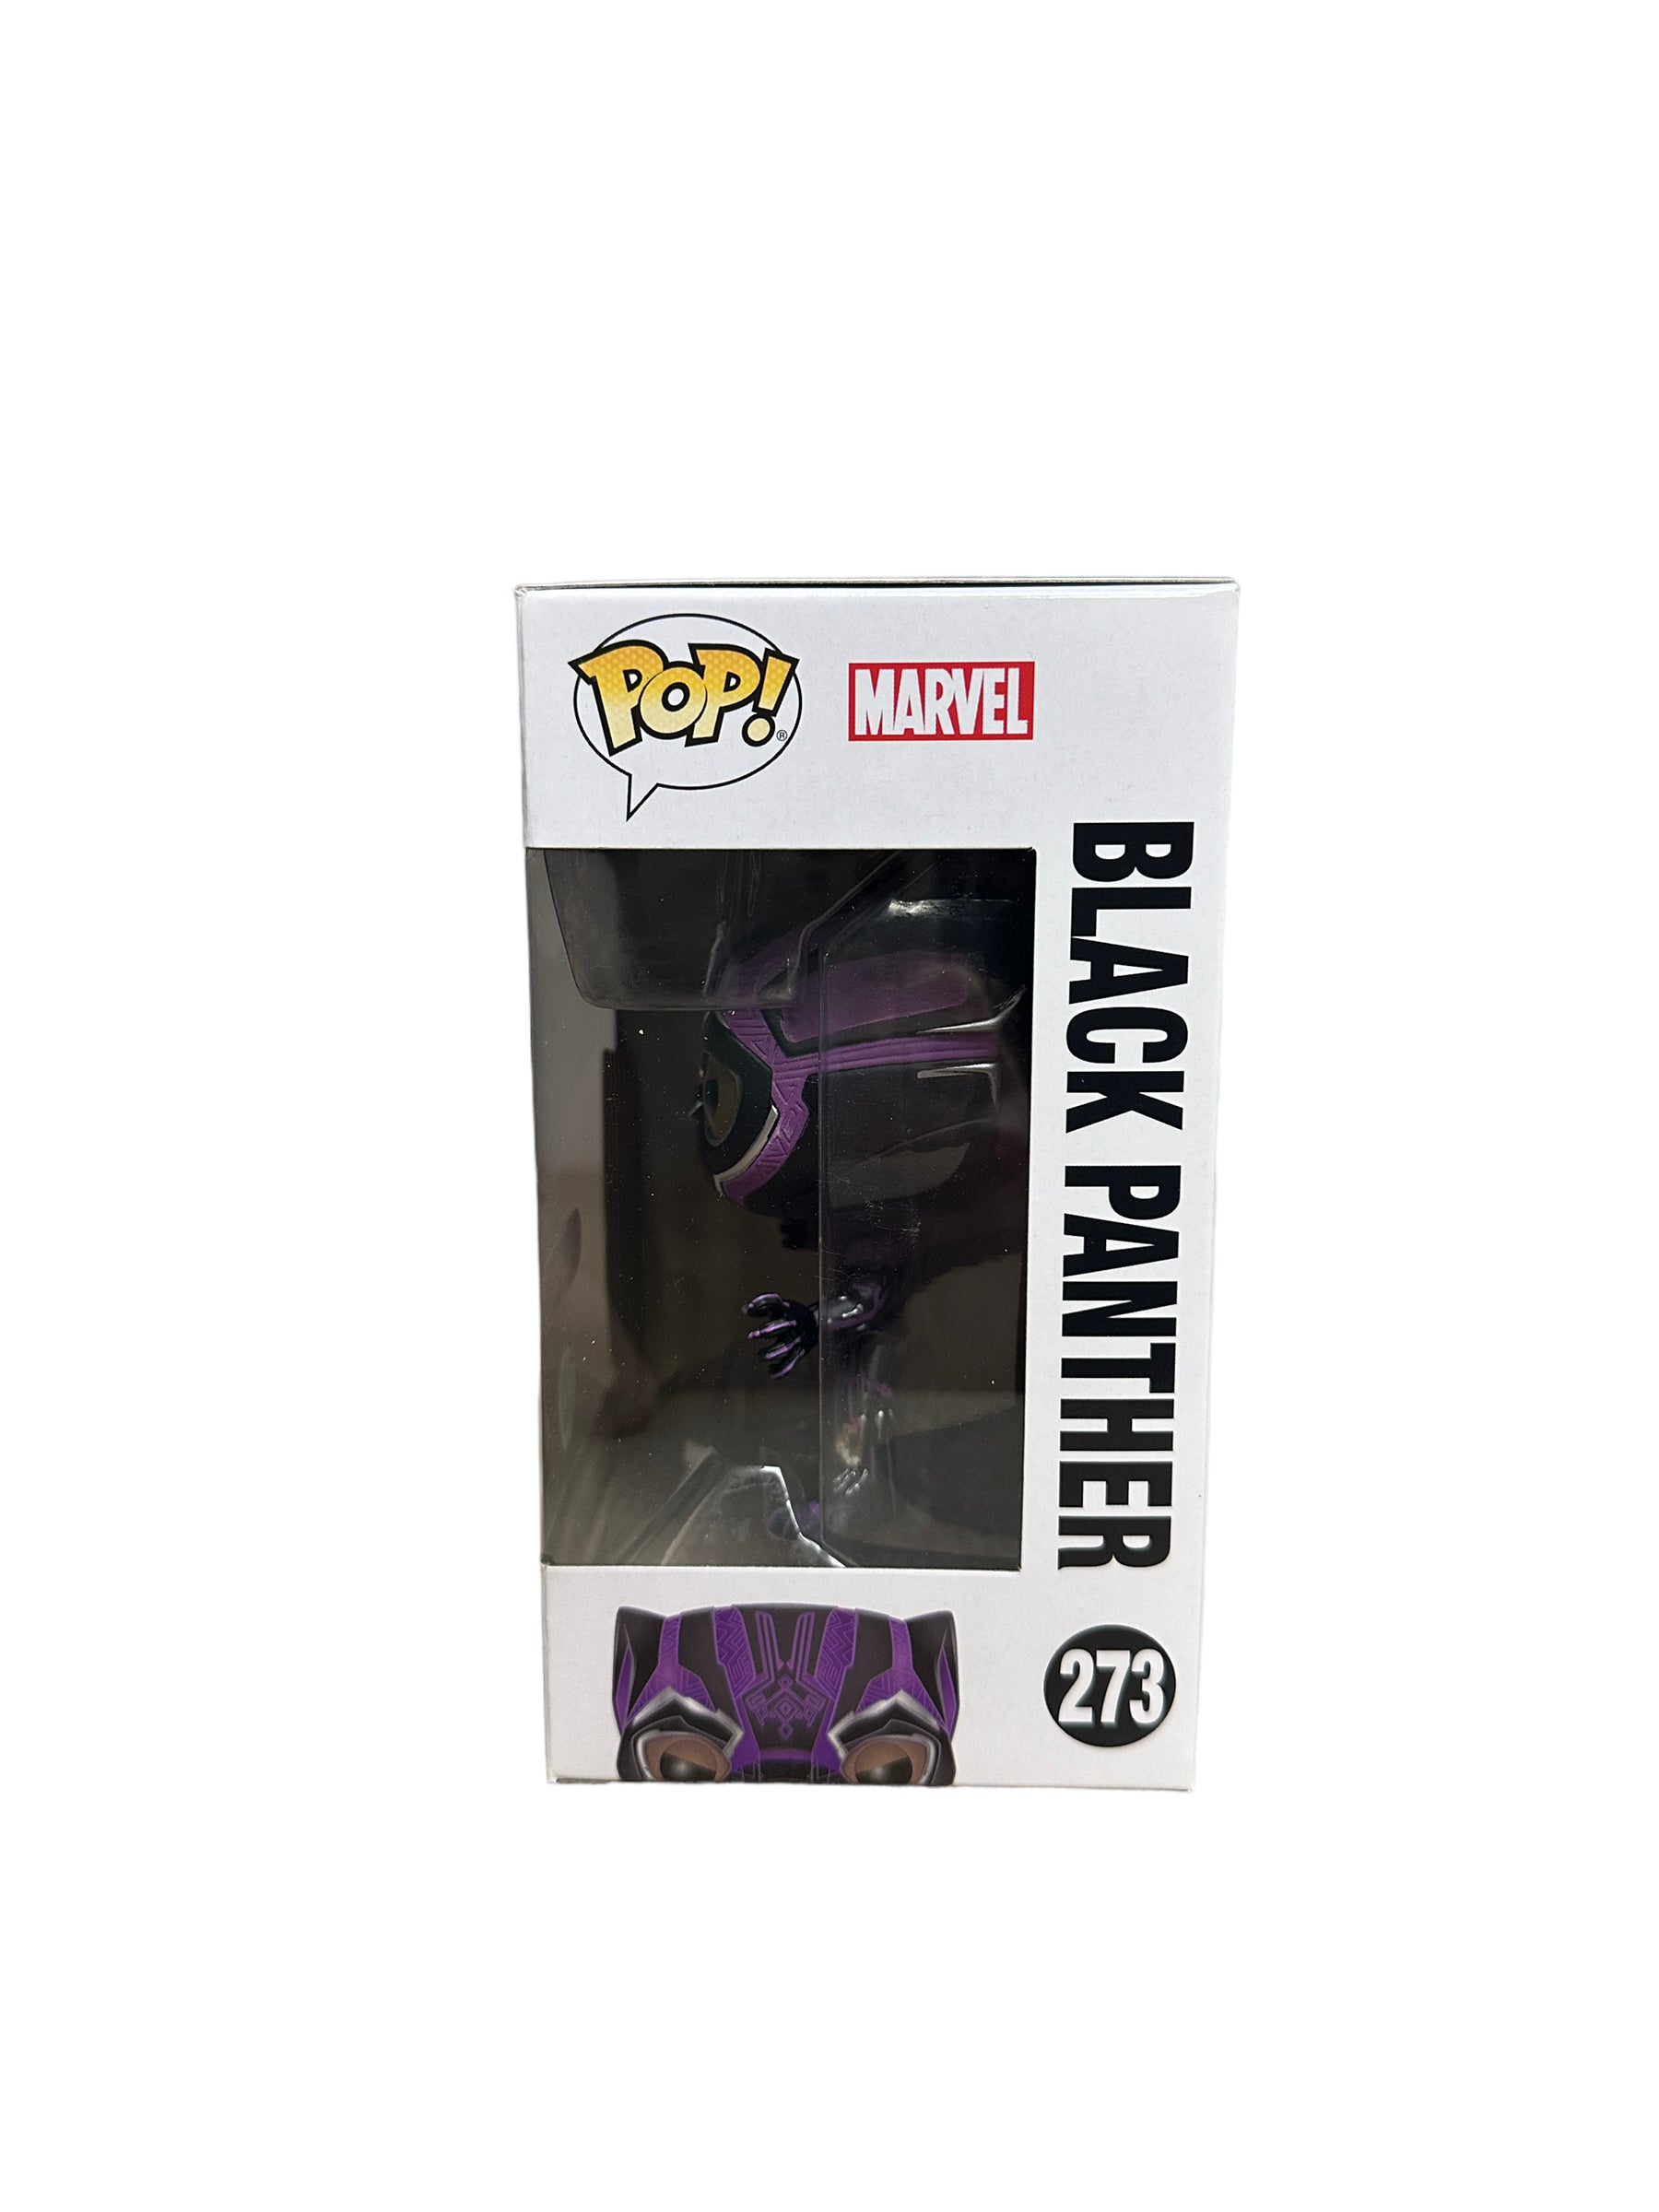 Black Panther #273 (Glows in the Dark) Funko Pop! - Black Panther - Target Exclusive - Condition 9.5/10